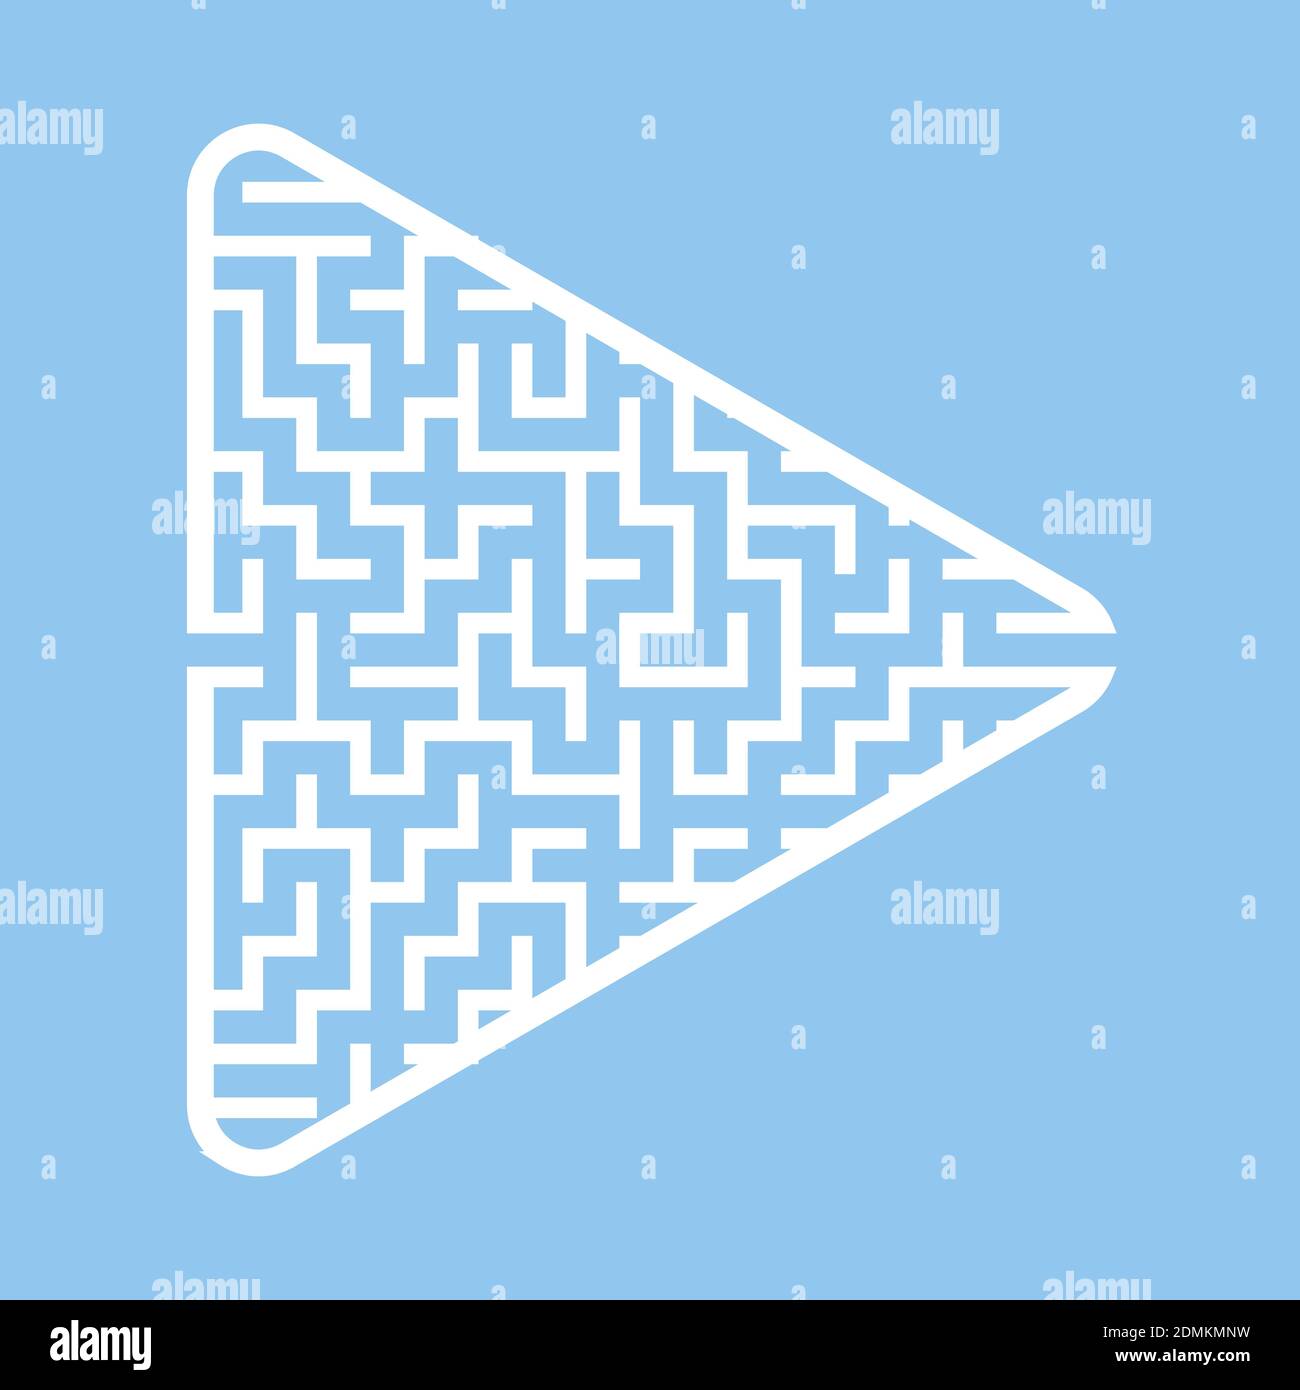 Labyrinth in the shape of an arrow. Game for kids. Puzzle for children. Find the right path. Maze conundrum. Stock Vector